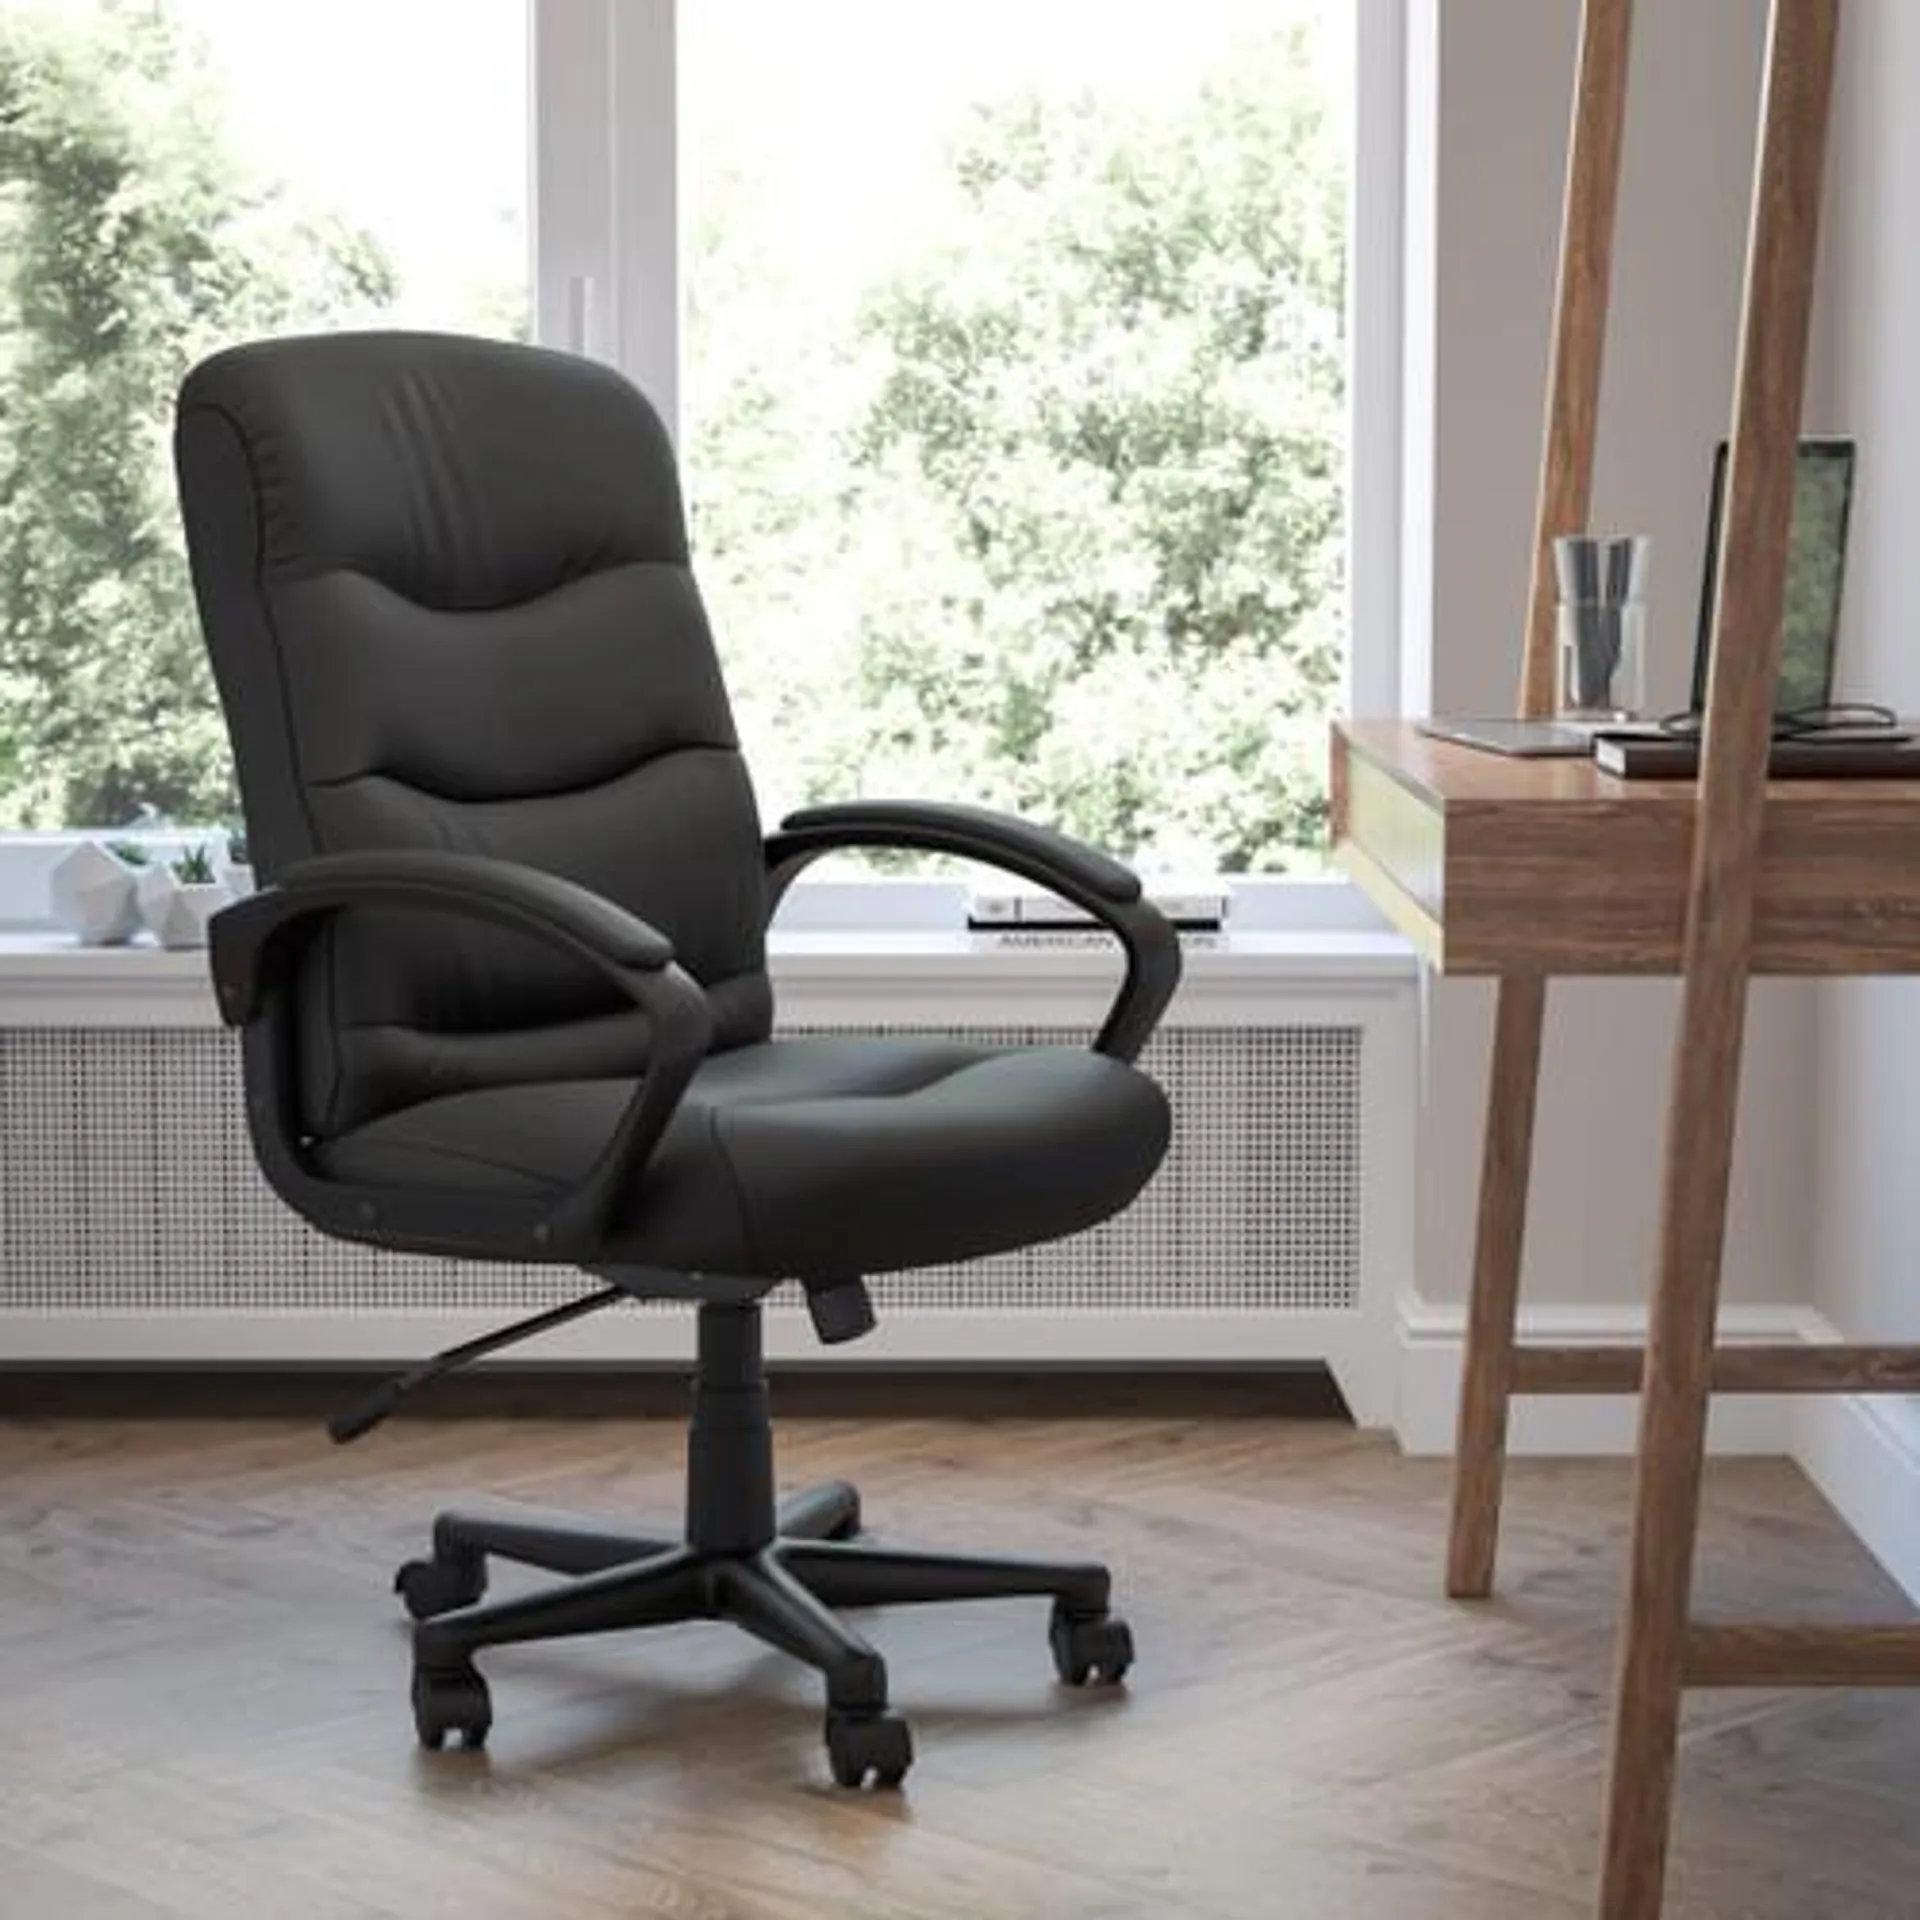 Mid-Back Black LeatherSoft Executive Swivel Office Chair with Three Line Horizontal Stitch Back and Arms - GO9771BKLEAGG